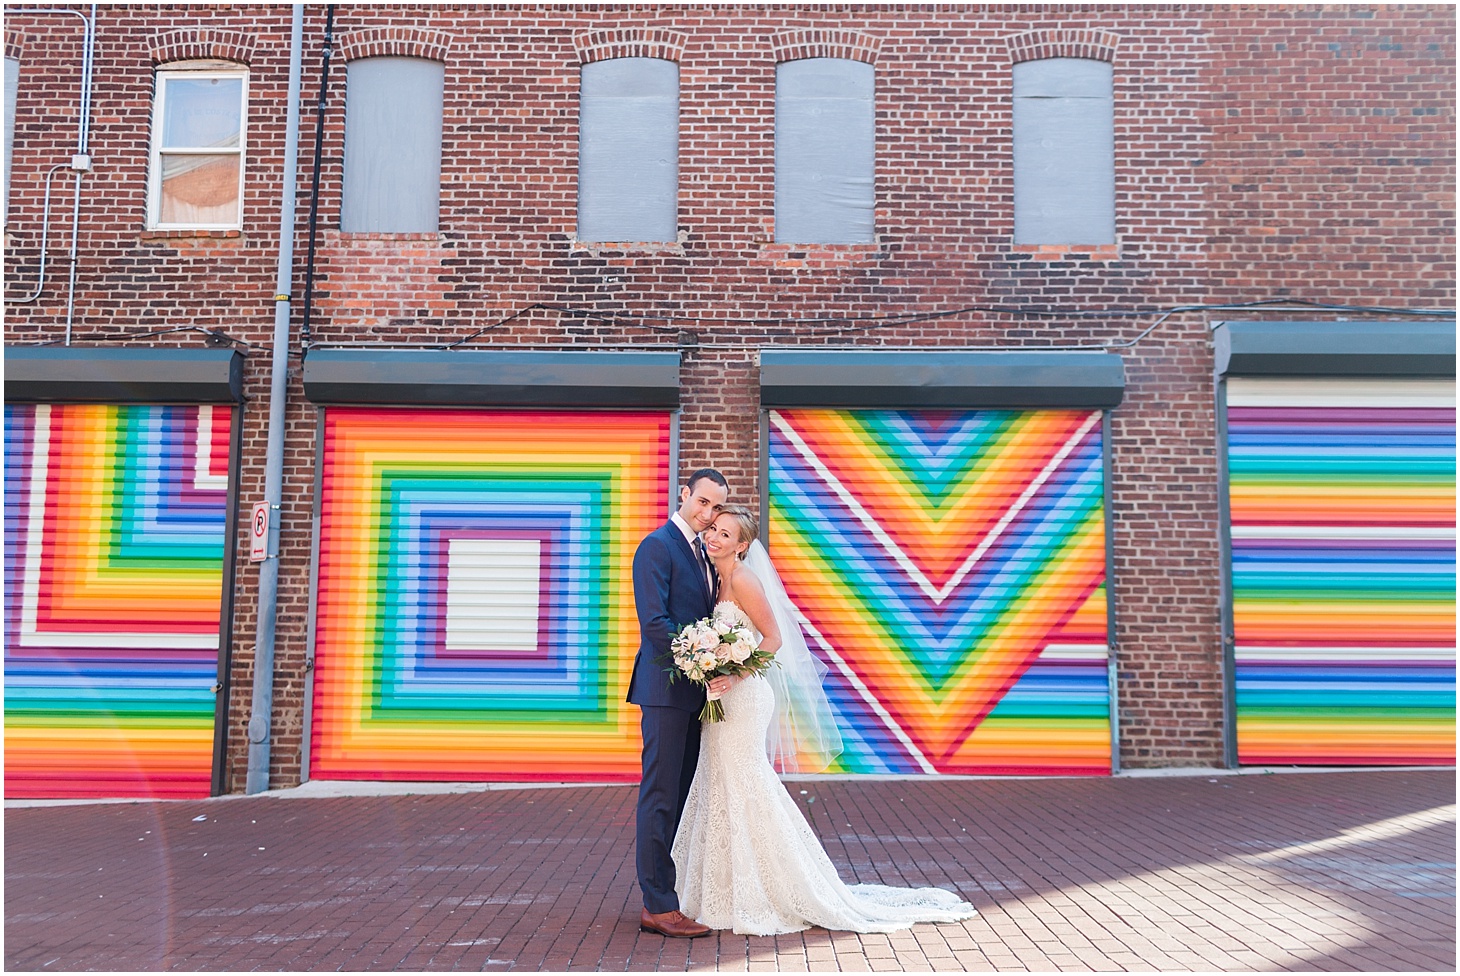 Wedding Portraits at Long View Gallery, Industrial-Chic Wedding in DC, Sarah Bradshaw Photography, DC Wedding Photographer